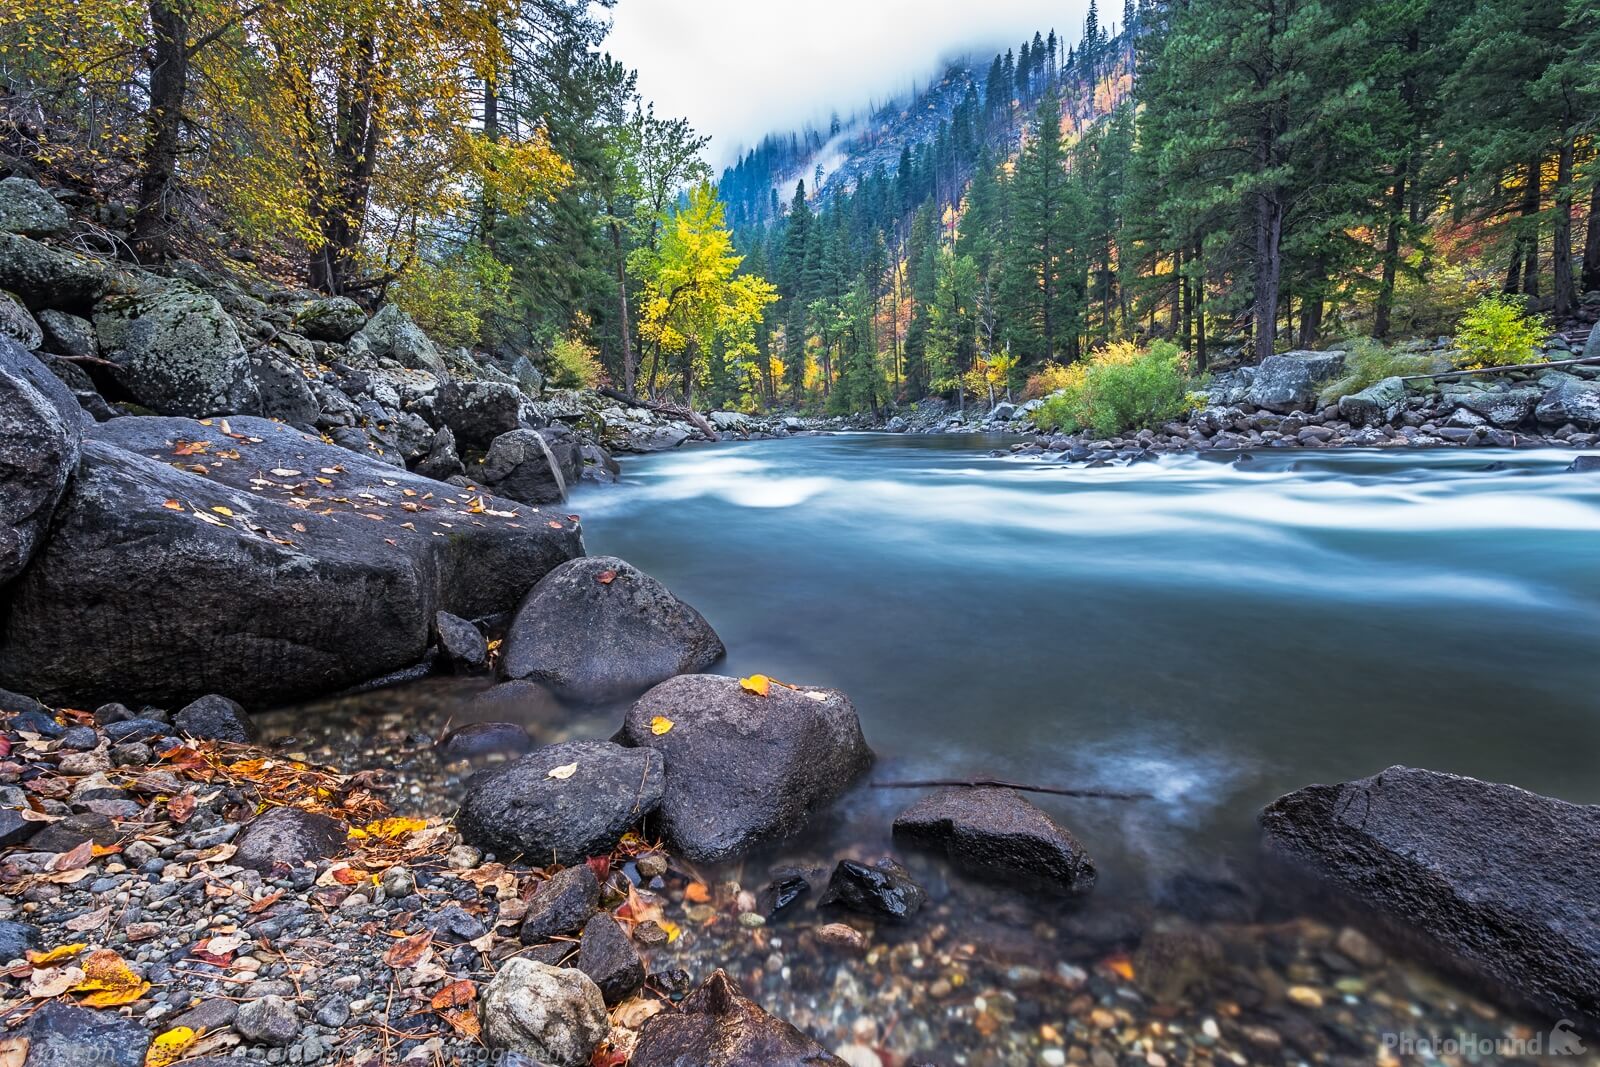 Image of Tumwater Canyon - US Highway 2 Mile 93.5 by Joe Becker